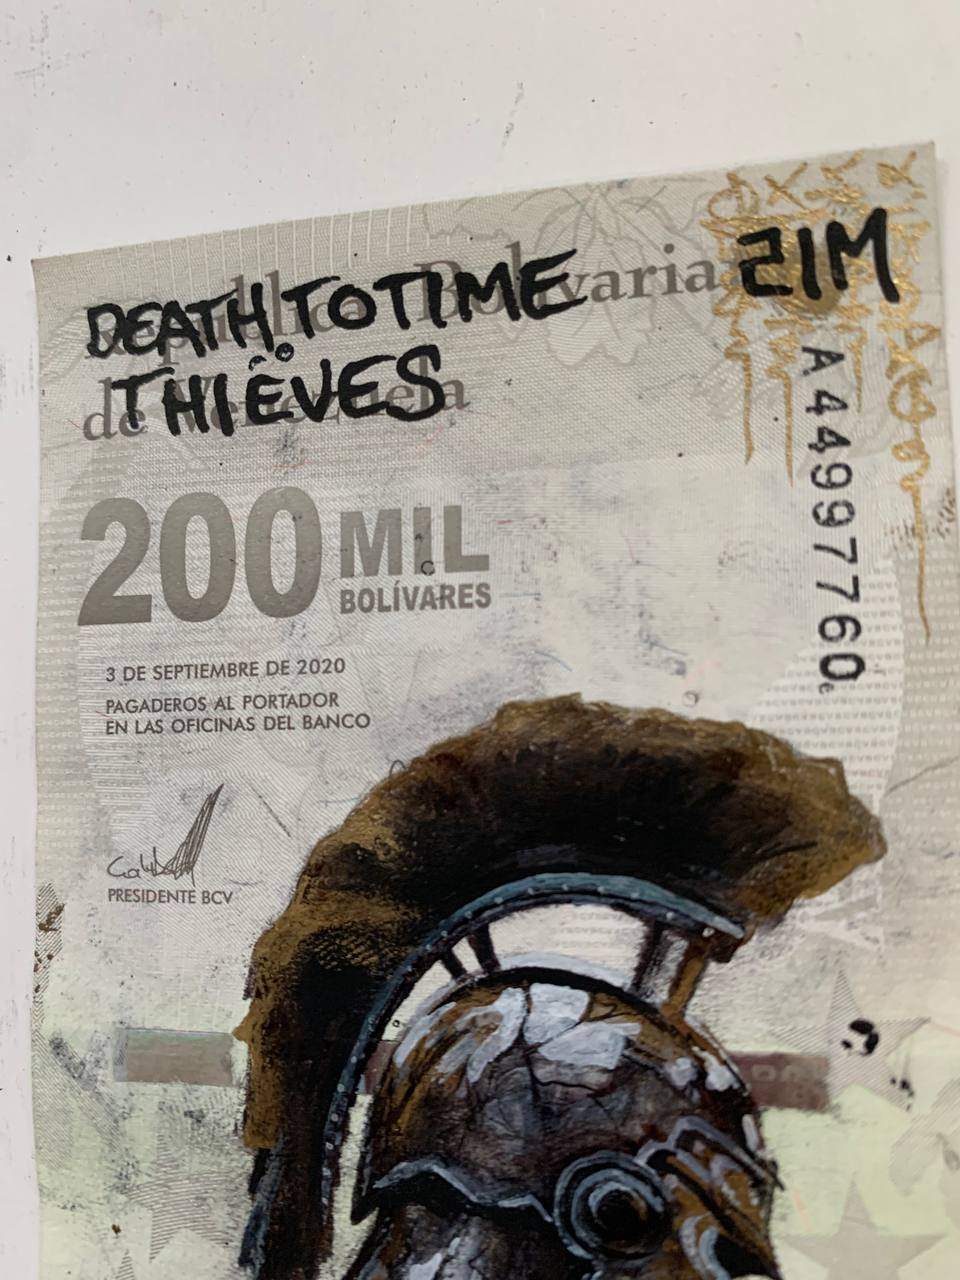 1/1 Time Thieves Note (796062)